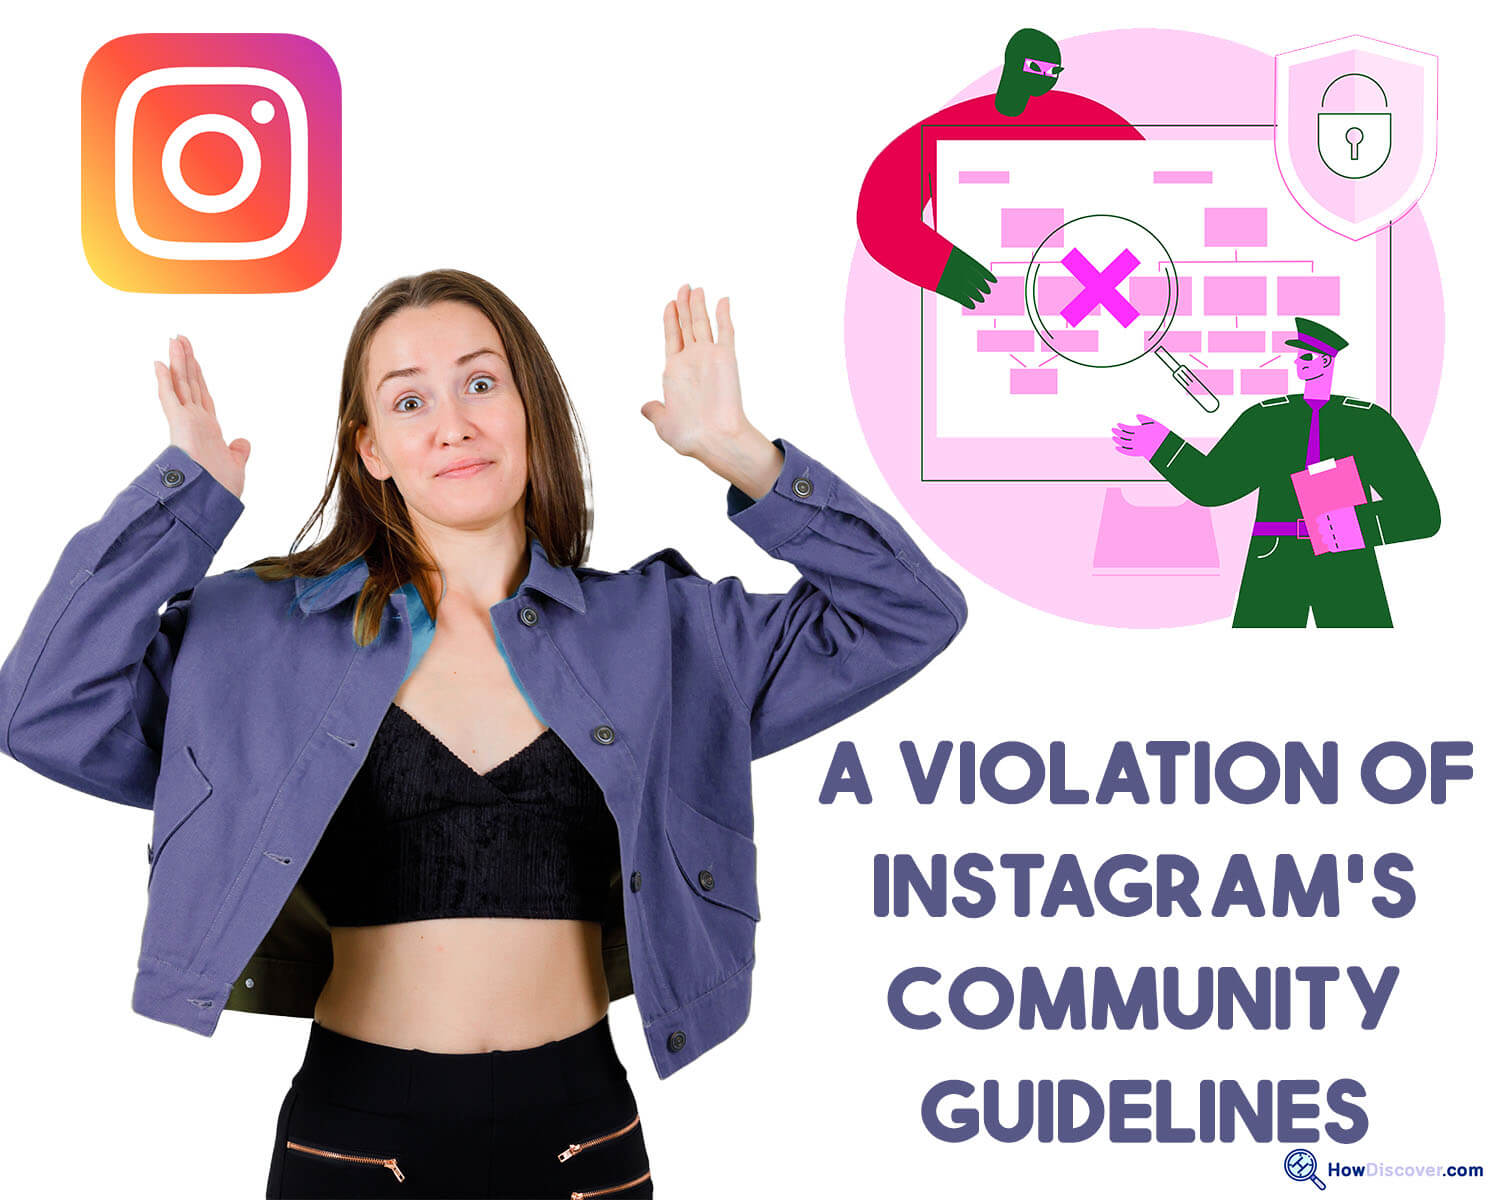 Why Did My Instagram Story Disappear Before 24 Hours - A violation of Instagram's community guidelines